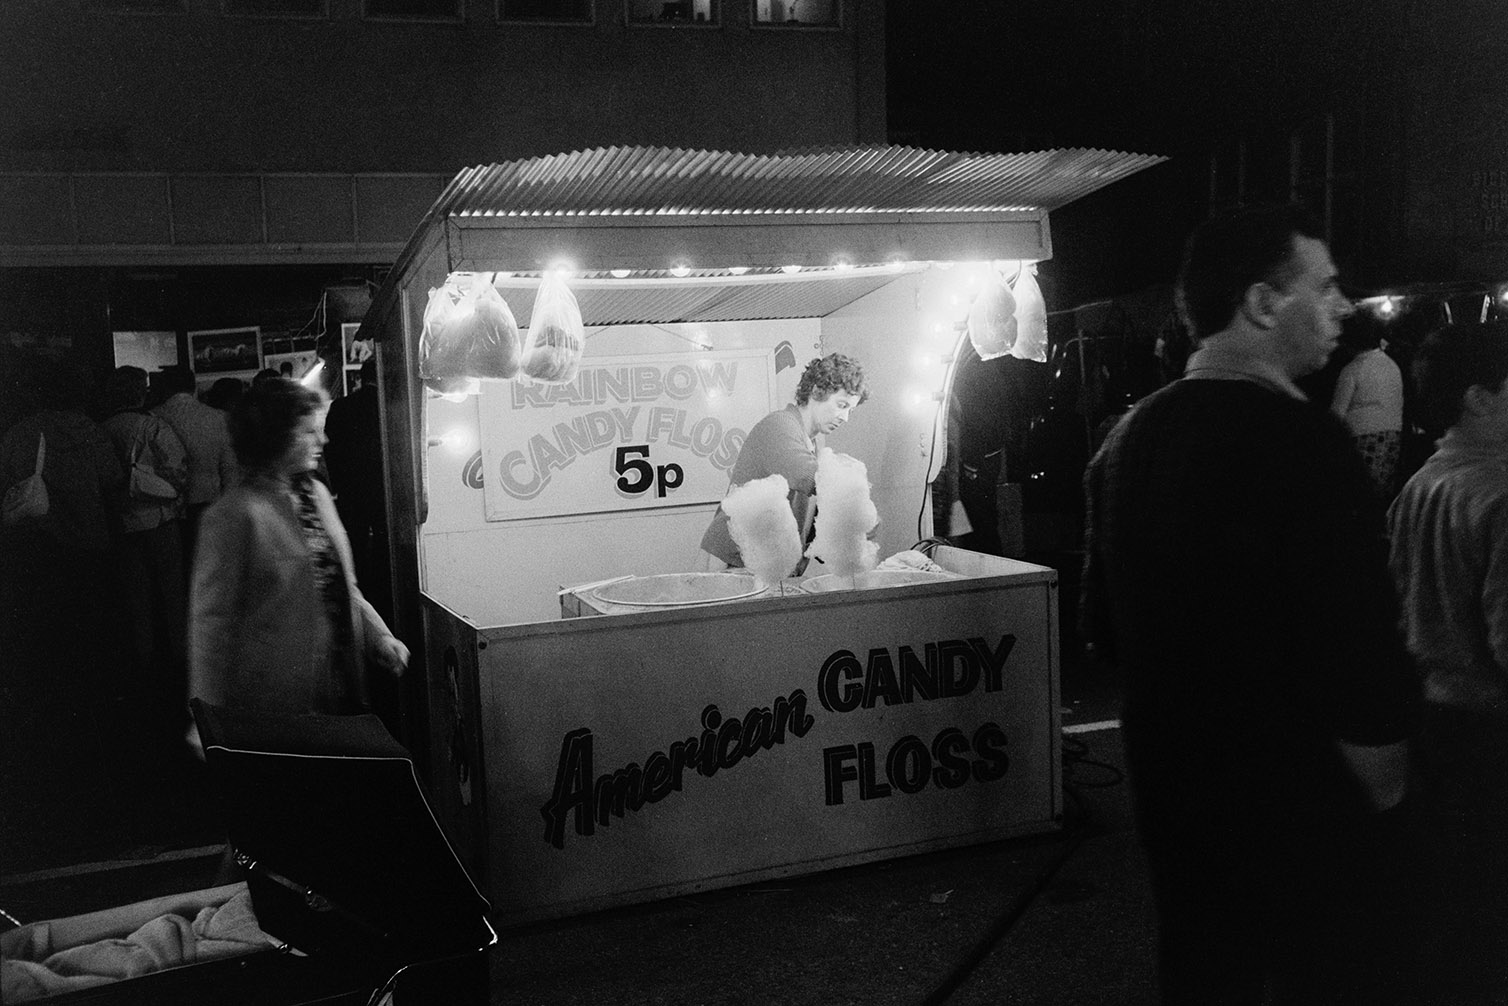 A woman selling American candy floss from a kiosk, at night in Northam, possibly at a fair or carnival. Men and women are walking past.